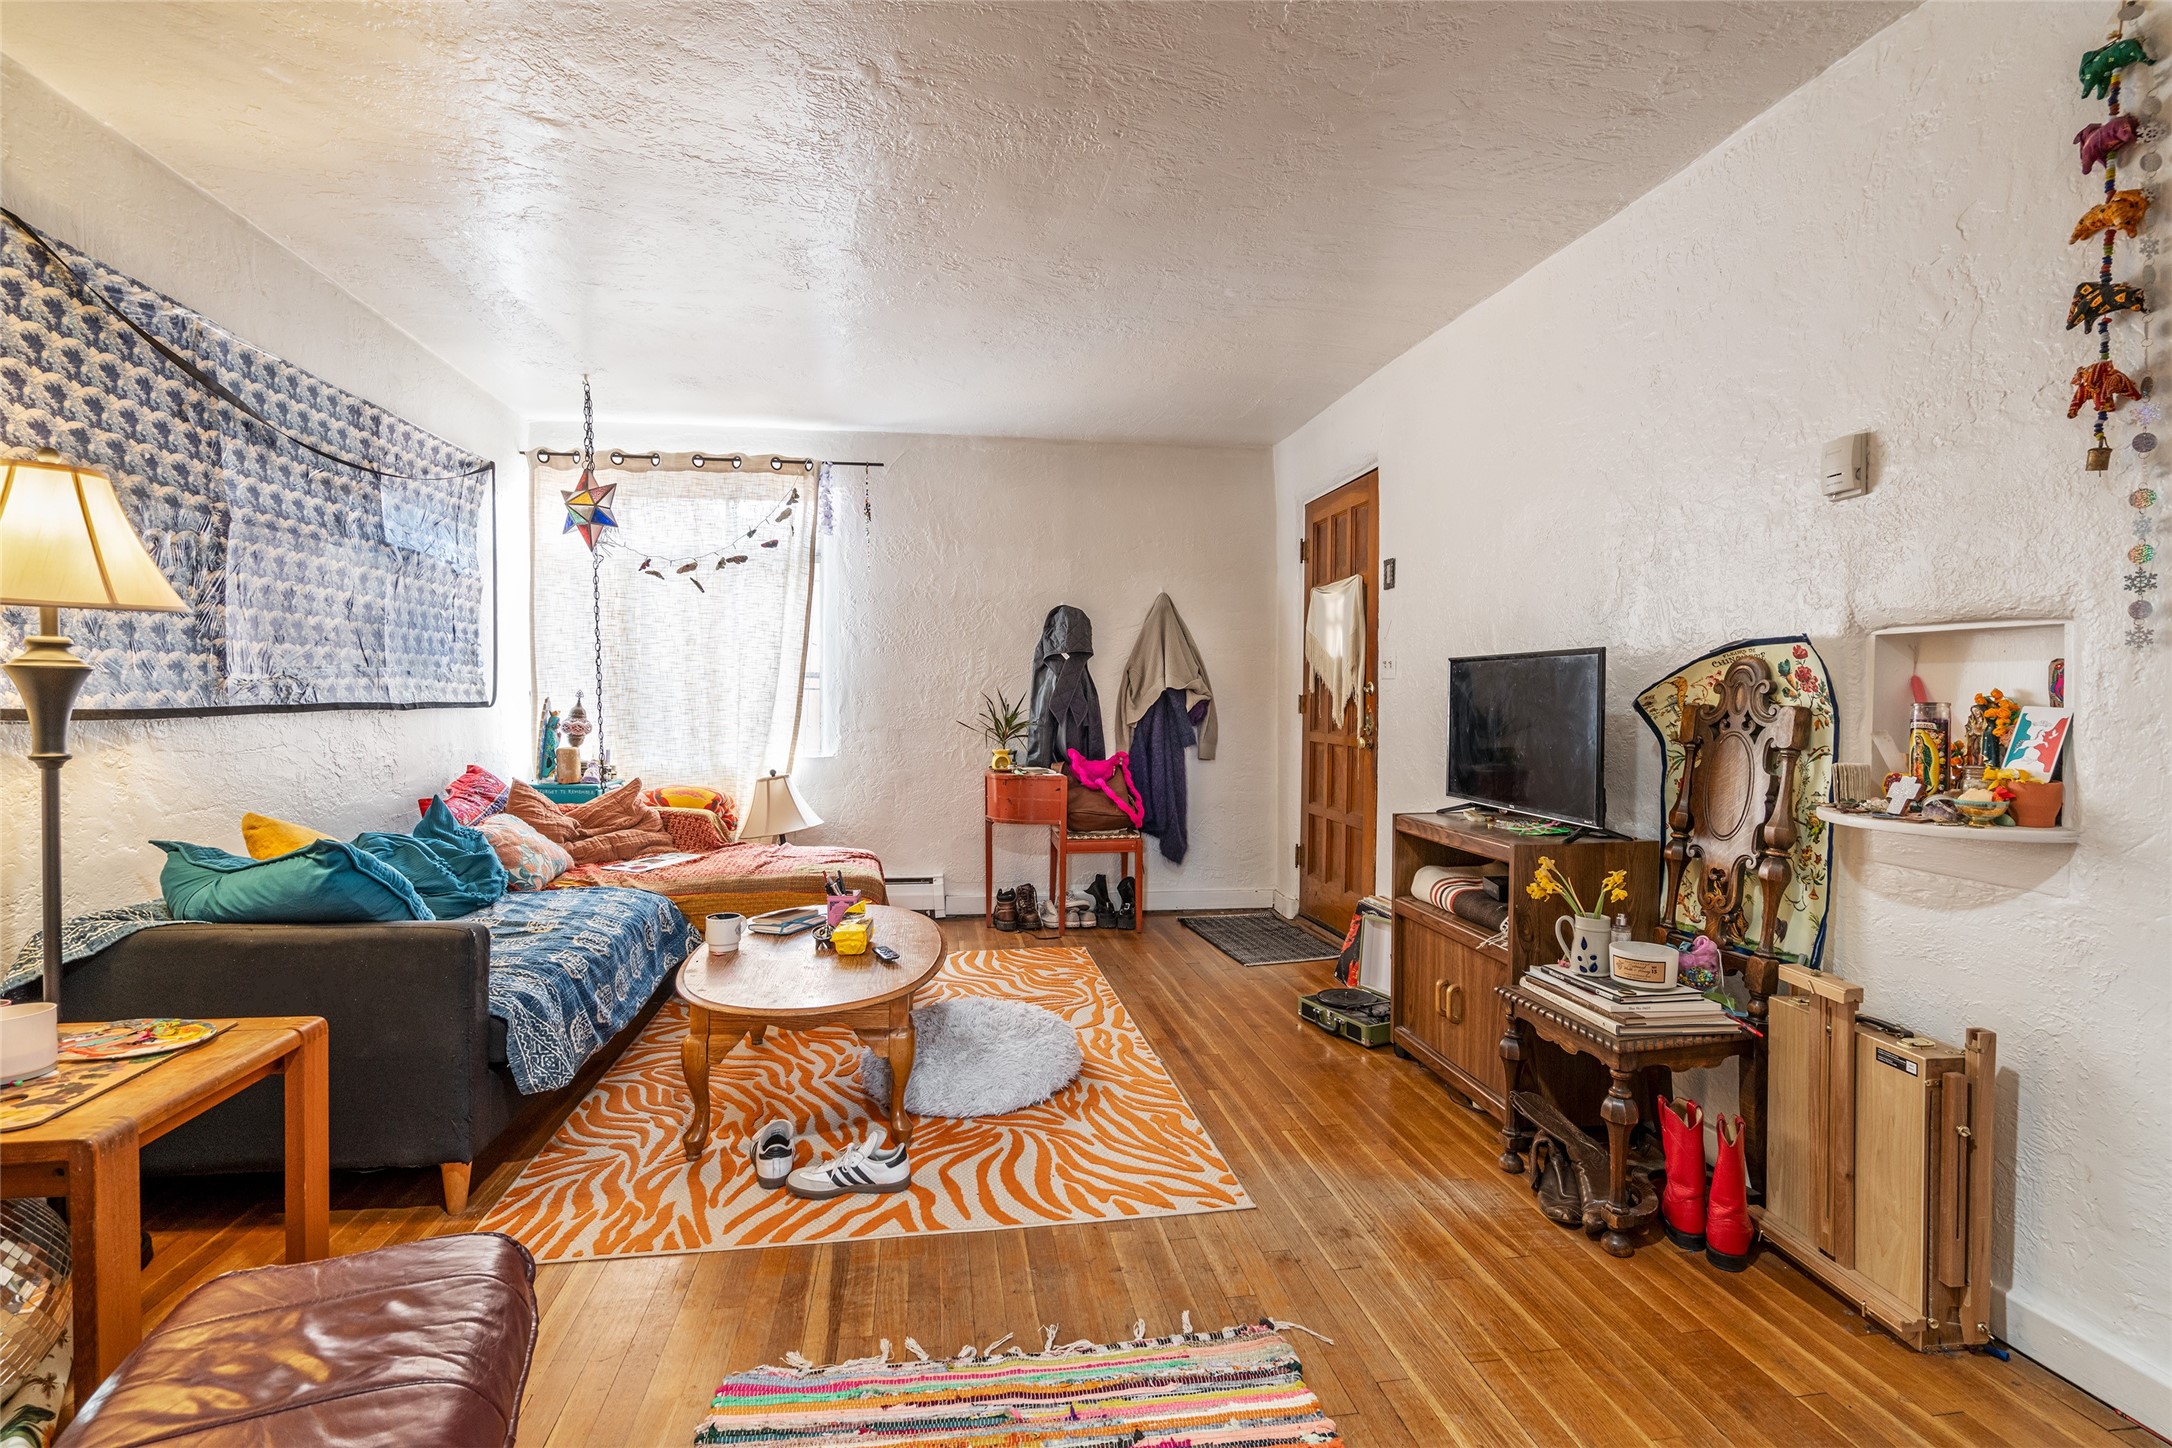 118-120 W Berger Street, Santa Fe, New Mexico 87501, ,Residential Income,For Sale,118-120 W Berger Street,202401250